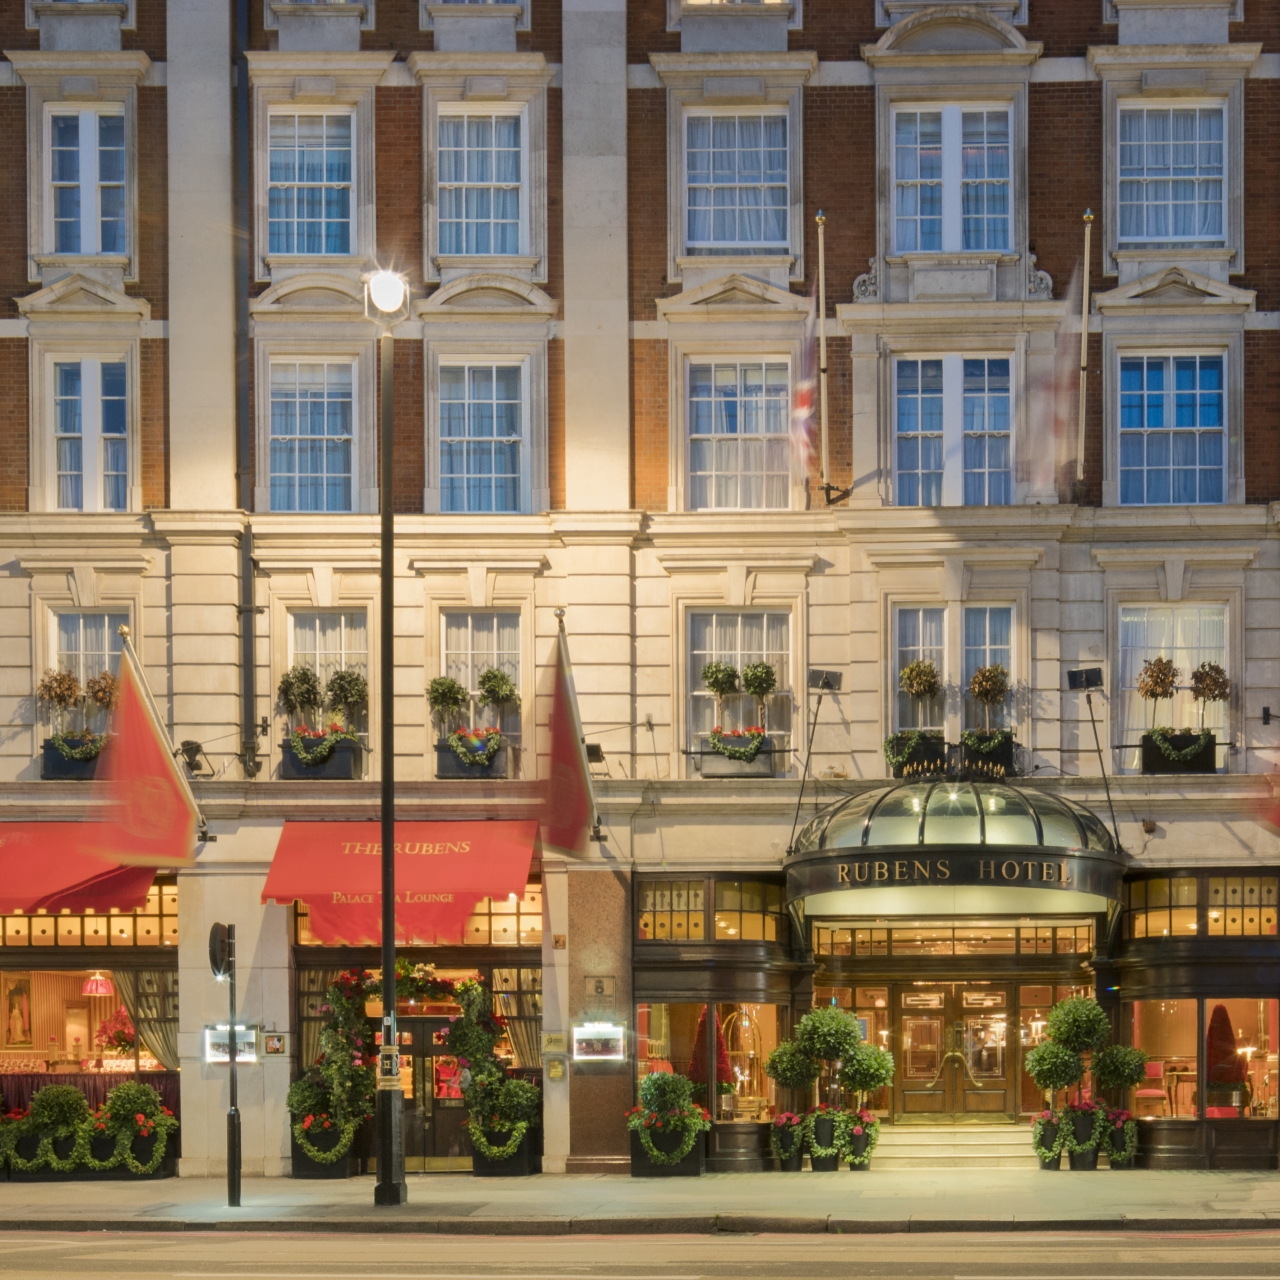 Rubens at the Palace Red Carnation Hotel - 5 HRS star hotel in London  (England)